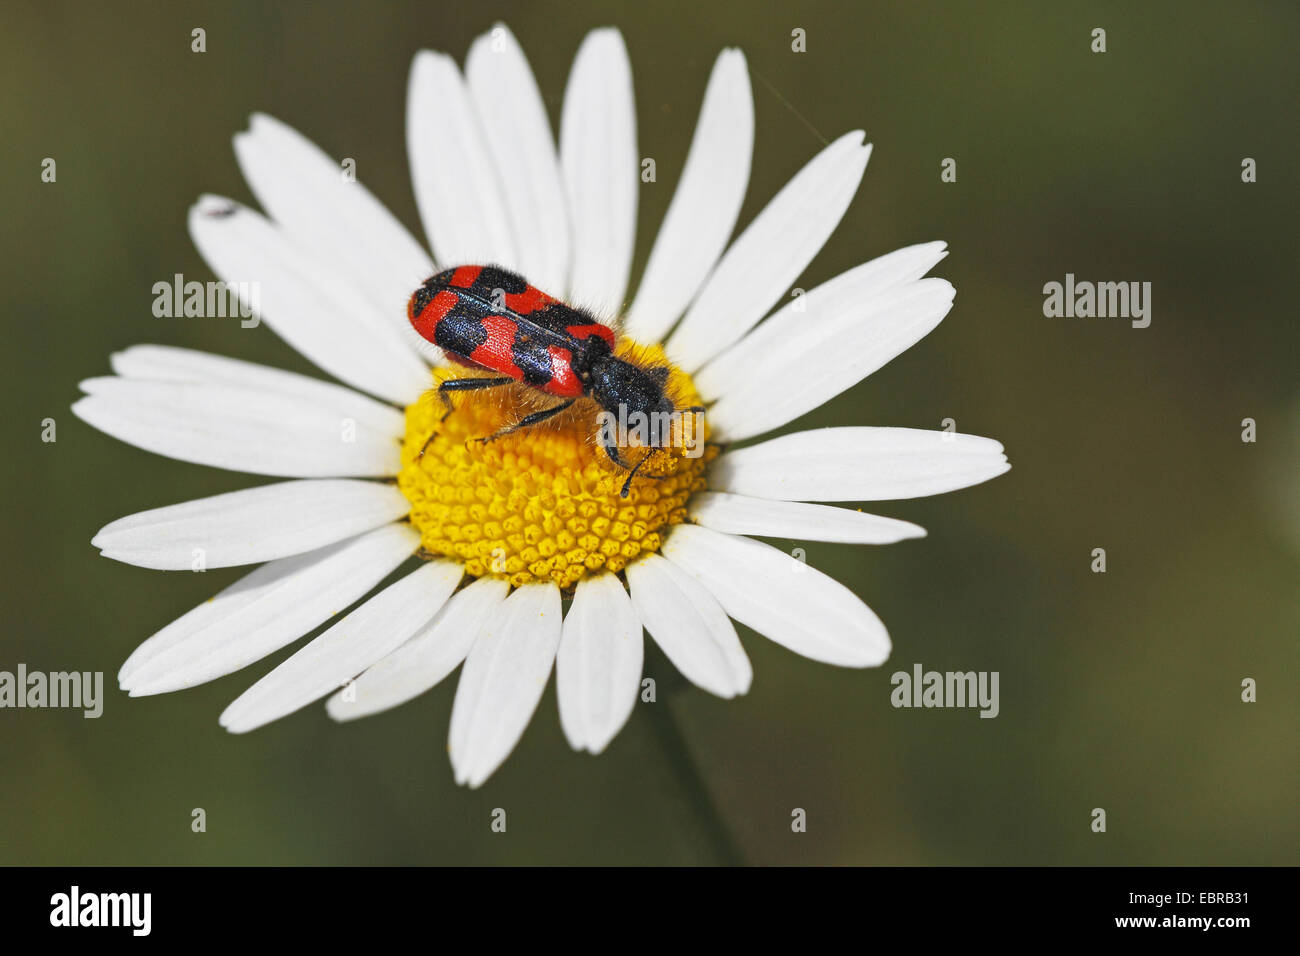 Soldier beetle, Checkered beetle  (Trichodes alvearius), sitting on a daisy blossom, Germany, Baden-Wuerttemberg Stock Photo